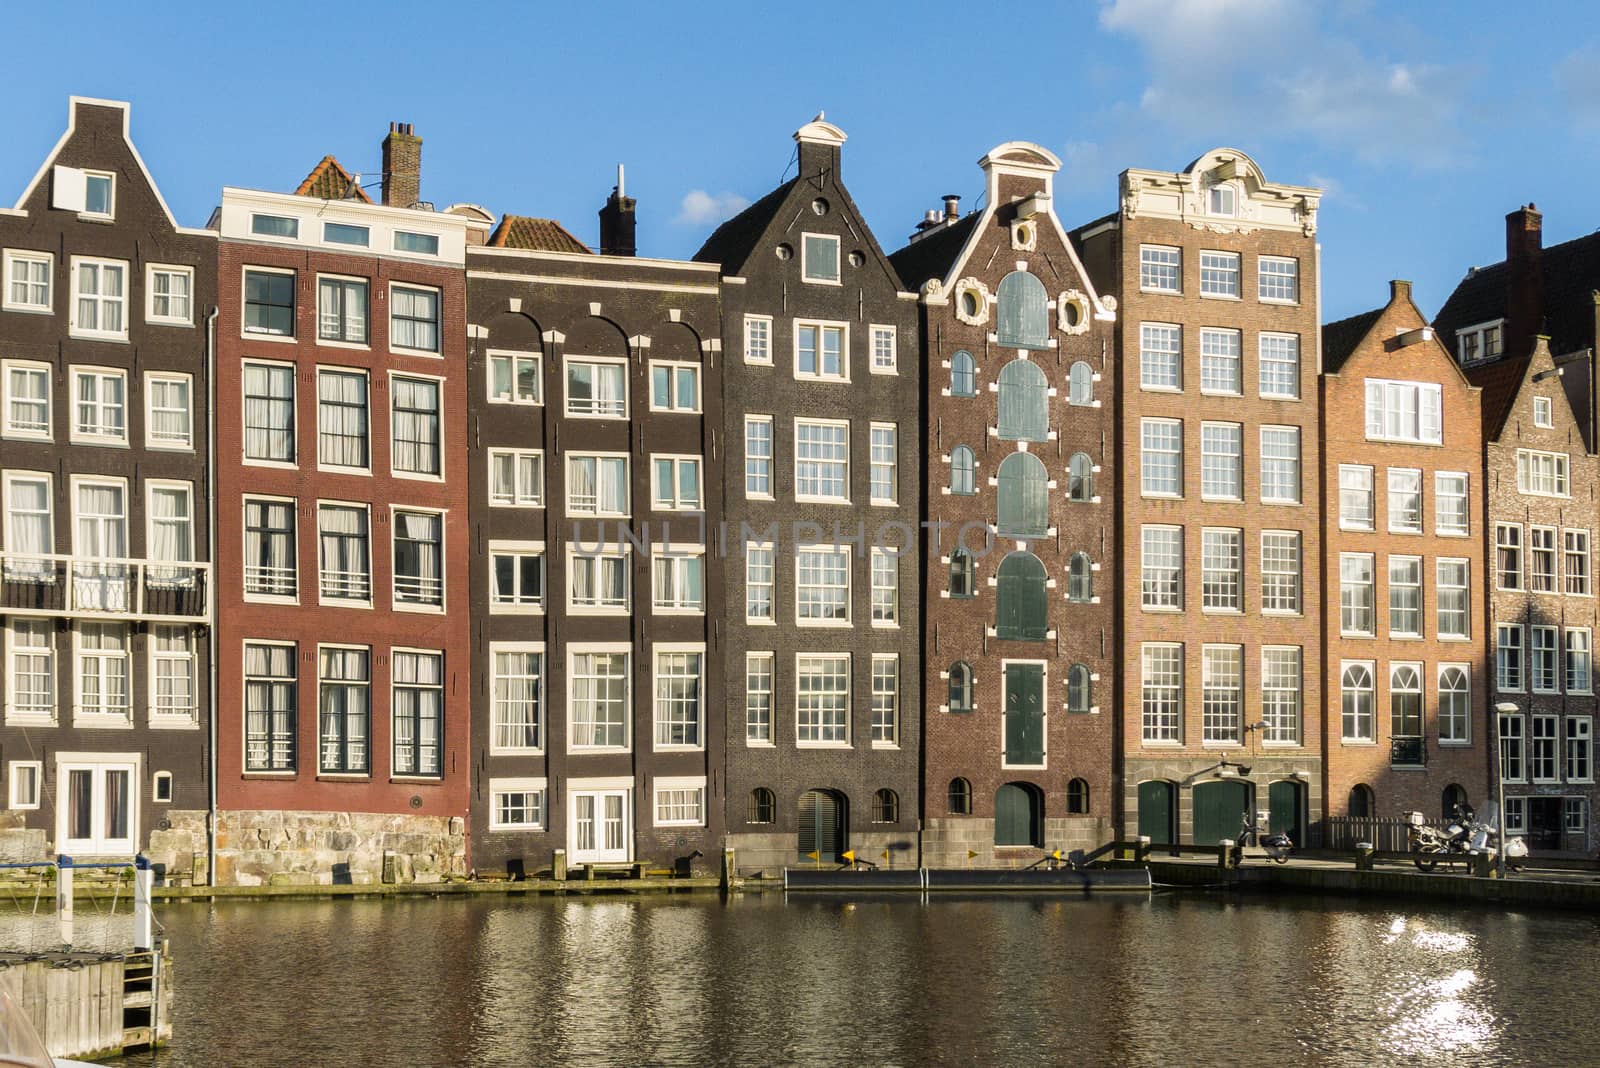 Houses in in a street by a canal in Amsterdam by chrisukphoto